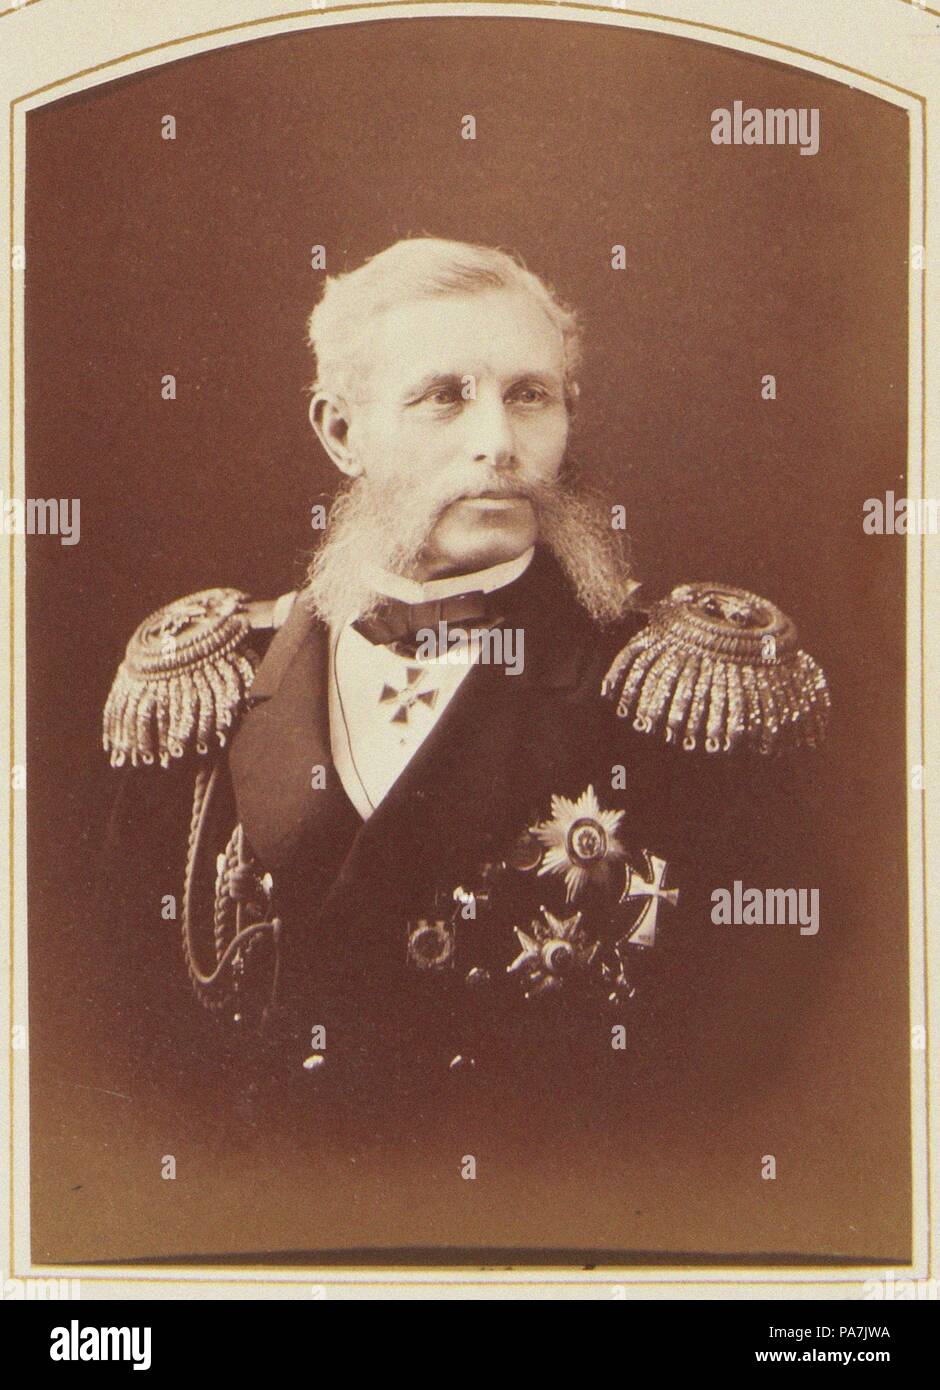 Portrait of the Admiral Grigory Ivanovich Butakov (1820-1882). Museum: Russian State Film and Photo Archive, Krasnogorsk. Stock Photo